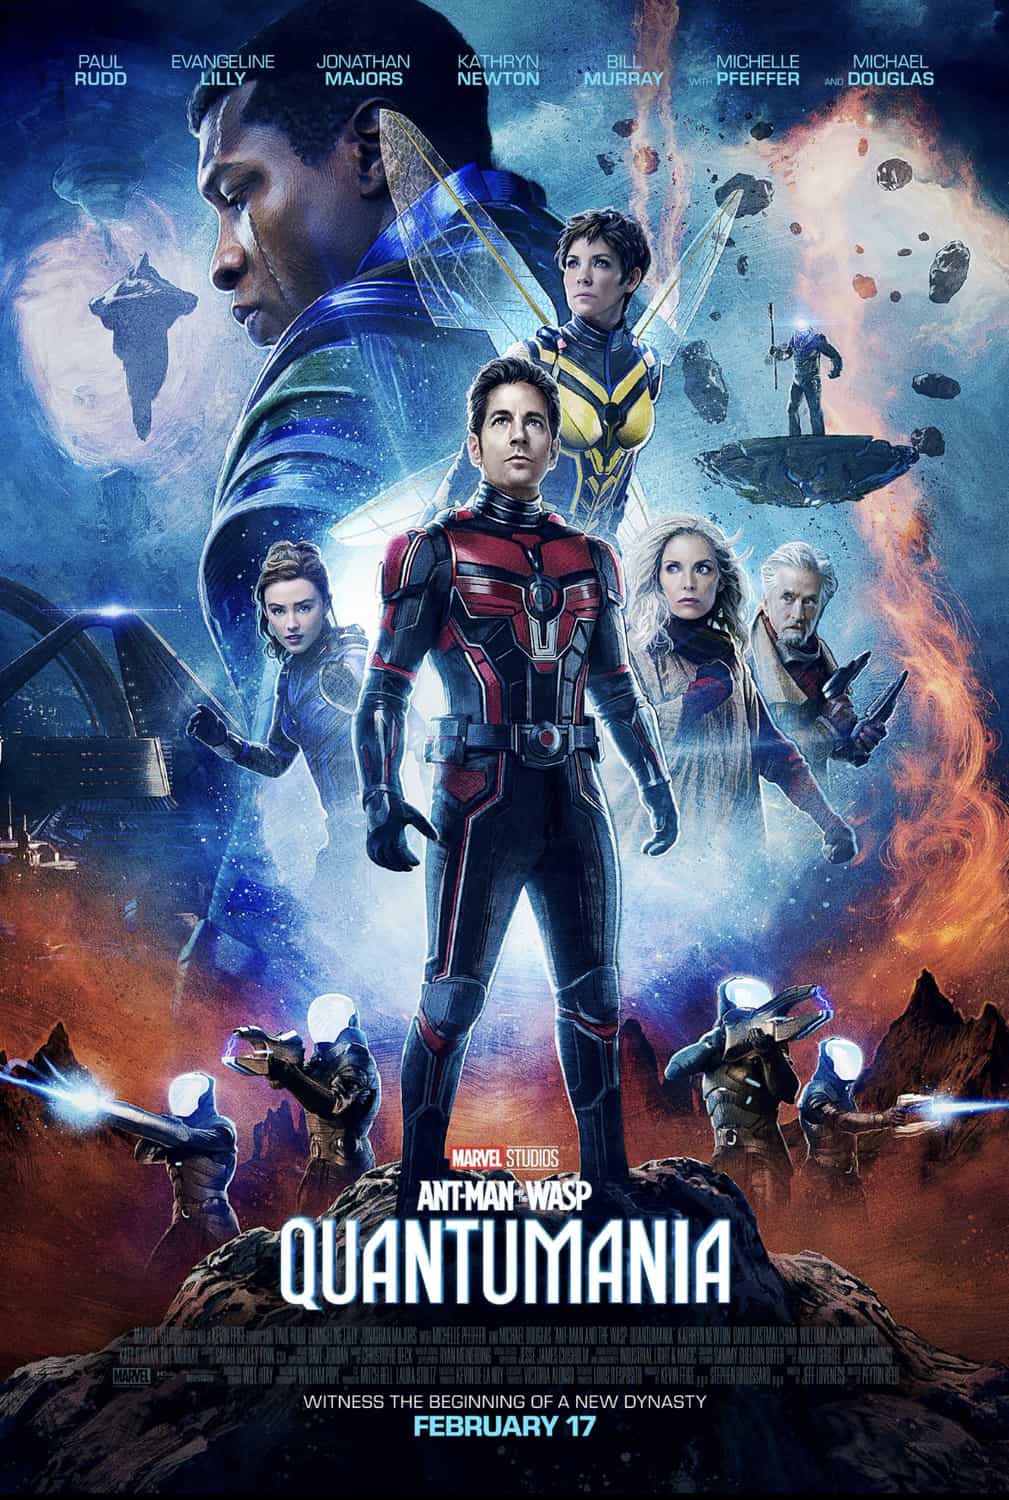 Ant-Man and the Wasp Quantumania is given a 12A age rating in the UK for moderate fantasy violence, rude humour